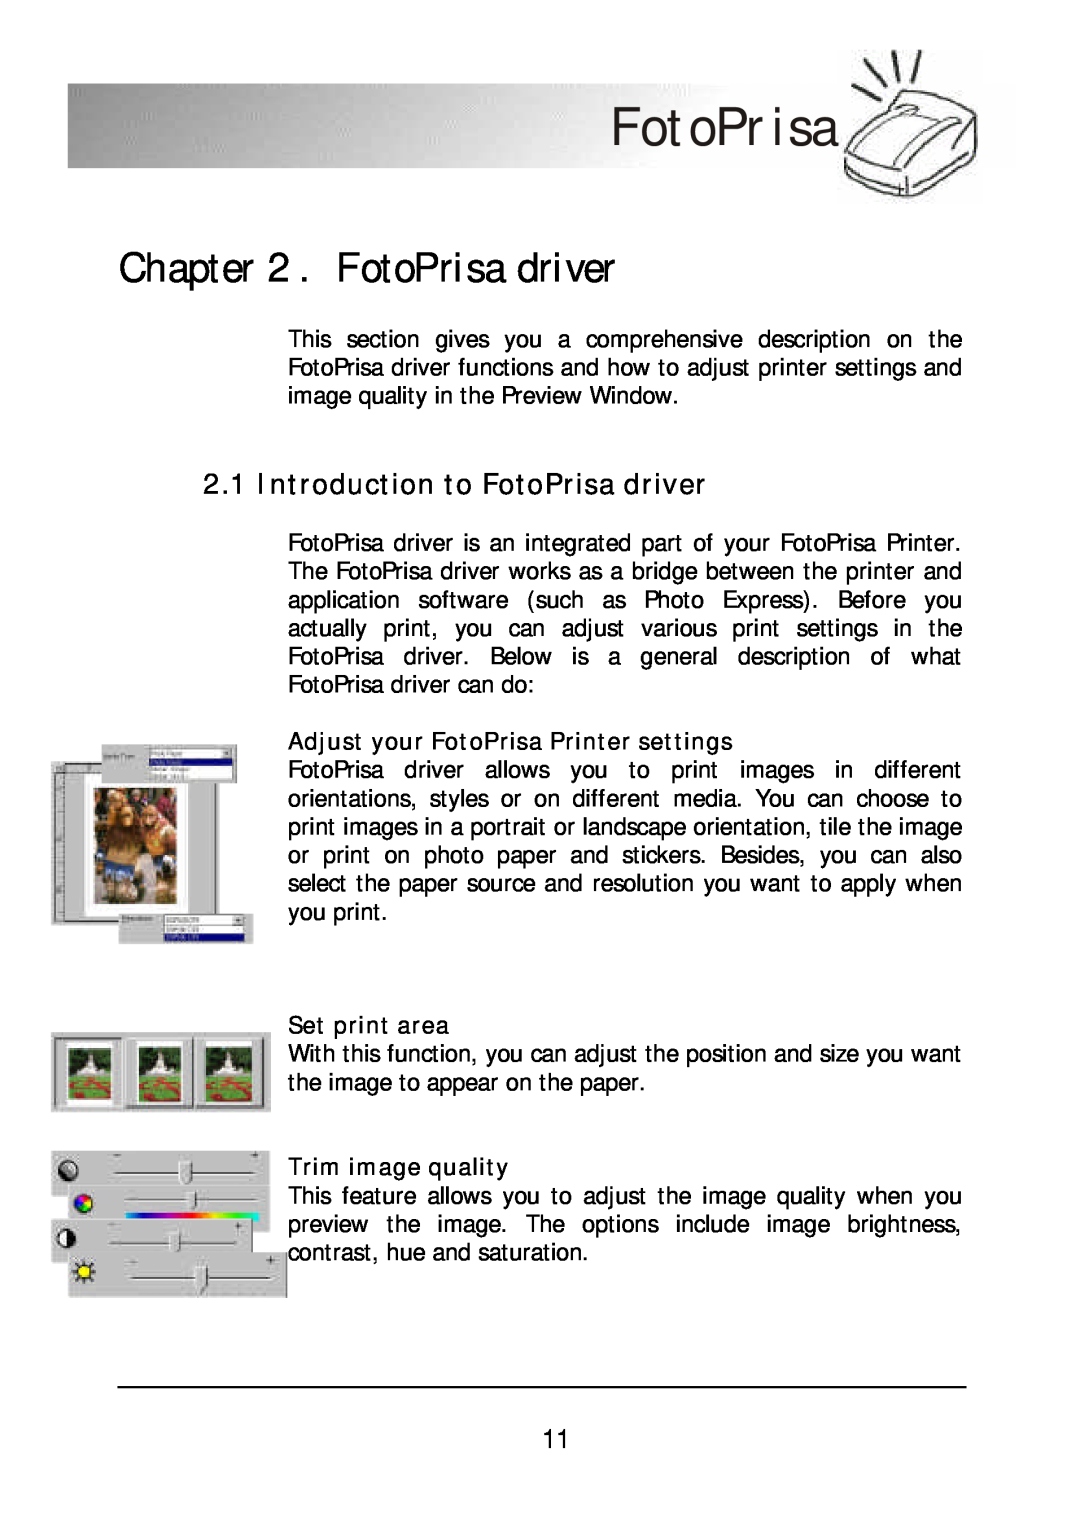 Acer 300P Introduction to FotoPrisa driver, Adjust your FotoPrisa Printer settings, Set print area, Trim image quality 